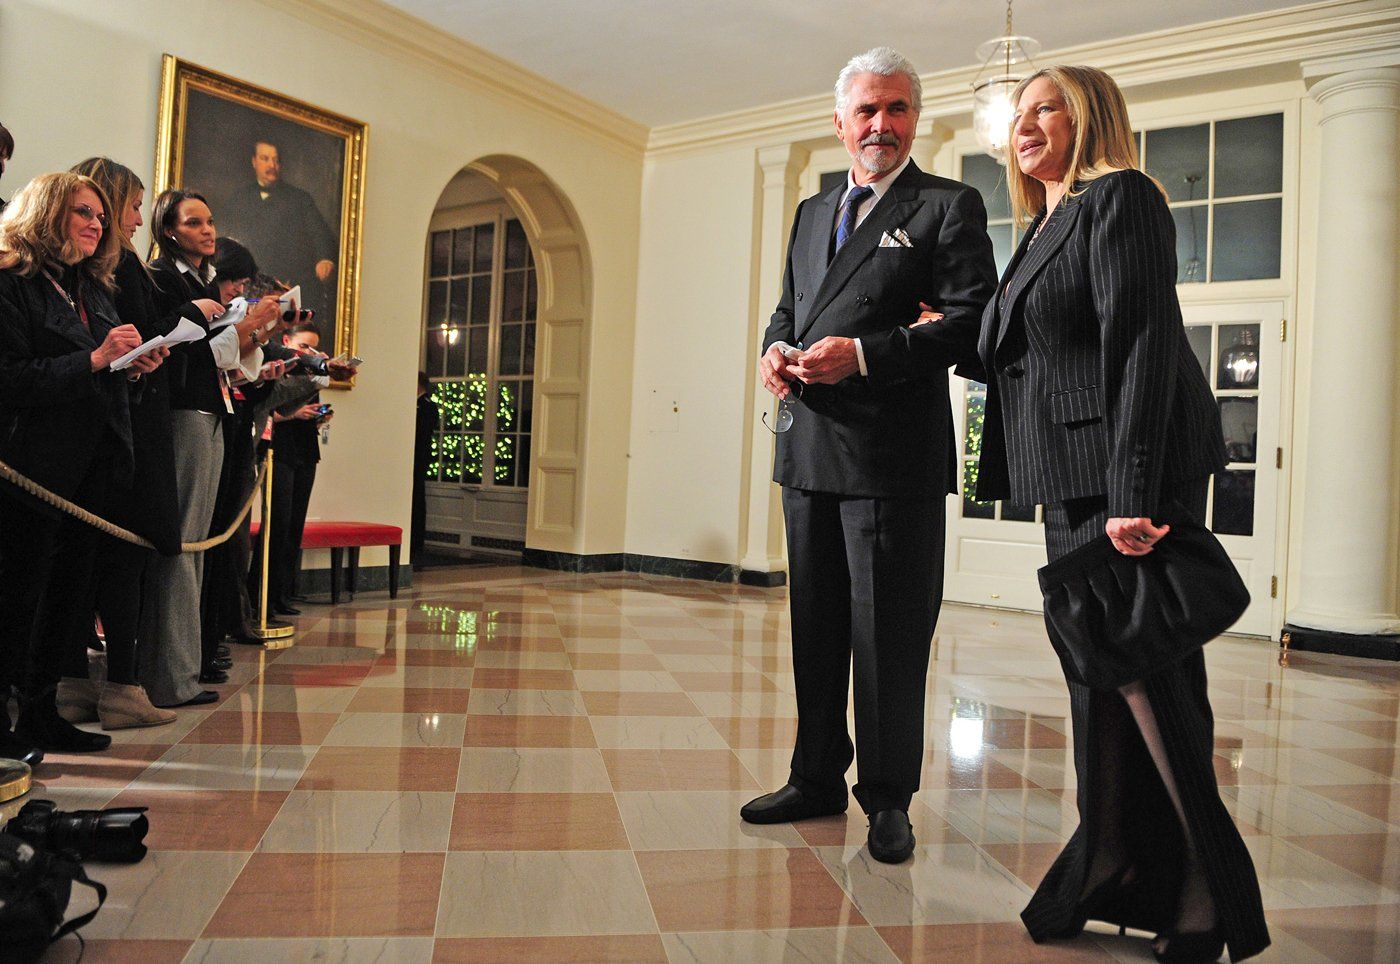 Brolin and Streisand at the White House for a state dinner 19, 2011 in Washington, DC. President Barack Obama and first lady Michelle Obama are hosting resident Hu Jintao for a state dinner during his visit to the United States.